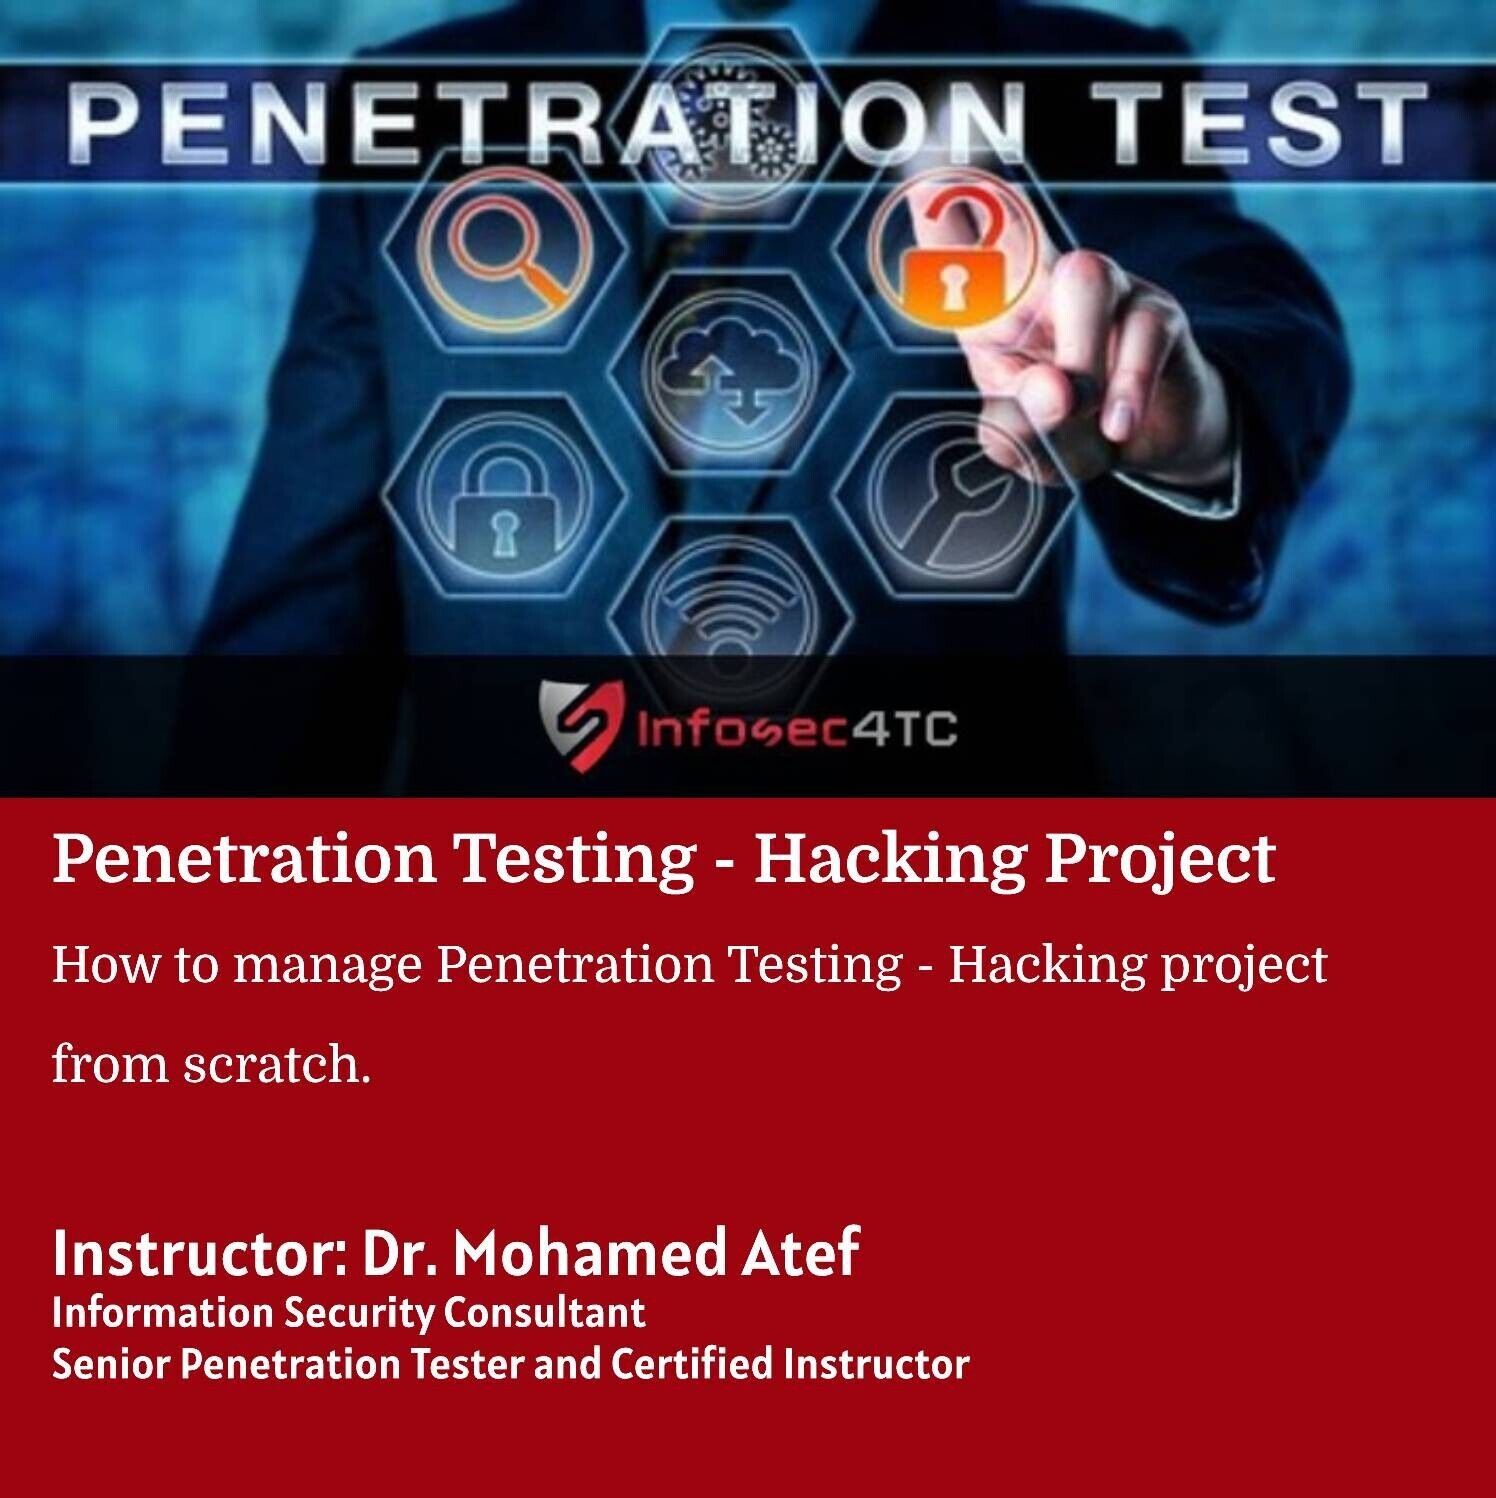 Penetration Testing - Ethical Hacking Project from A to Z + Free Resources